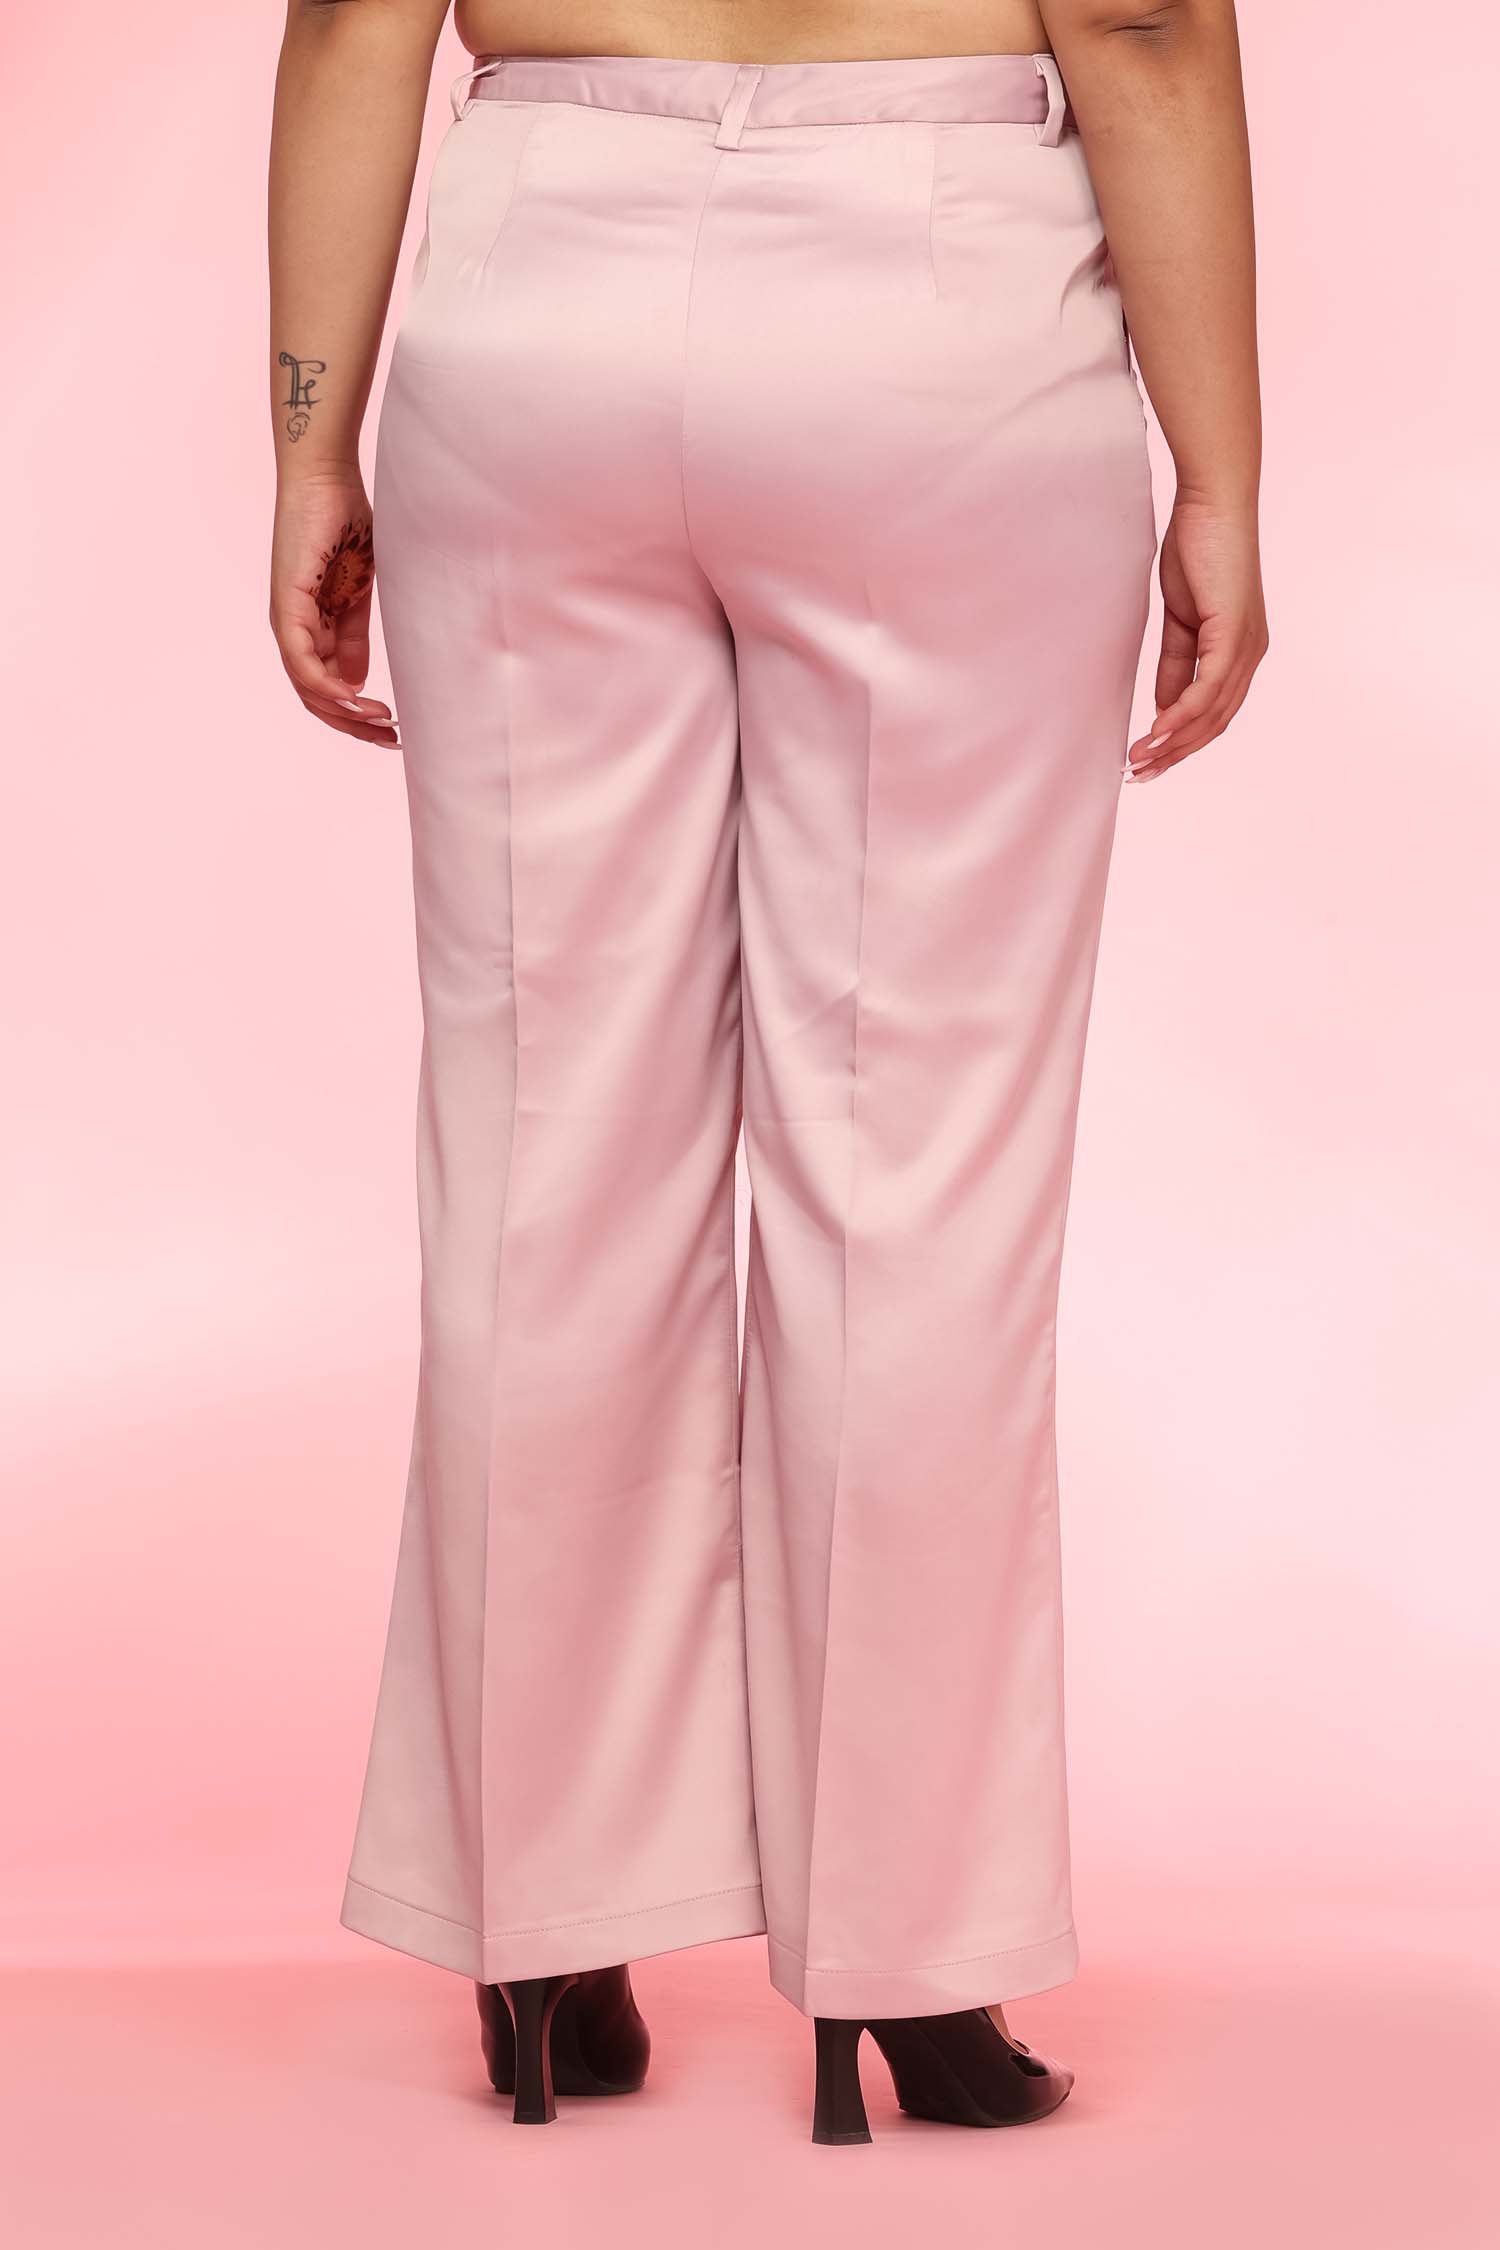 Bubble Gum Flared Trousers